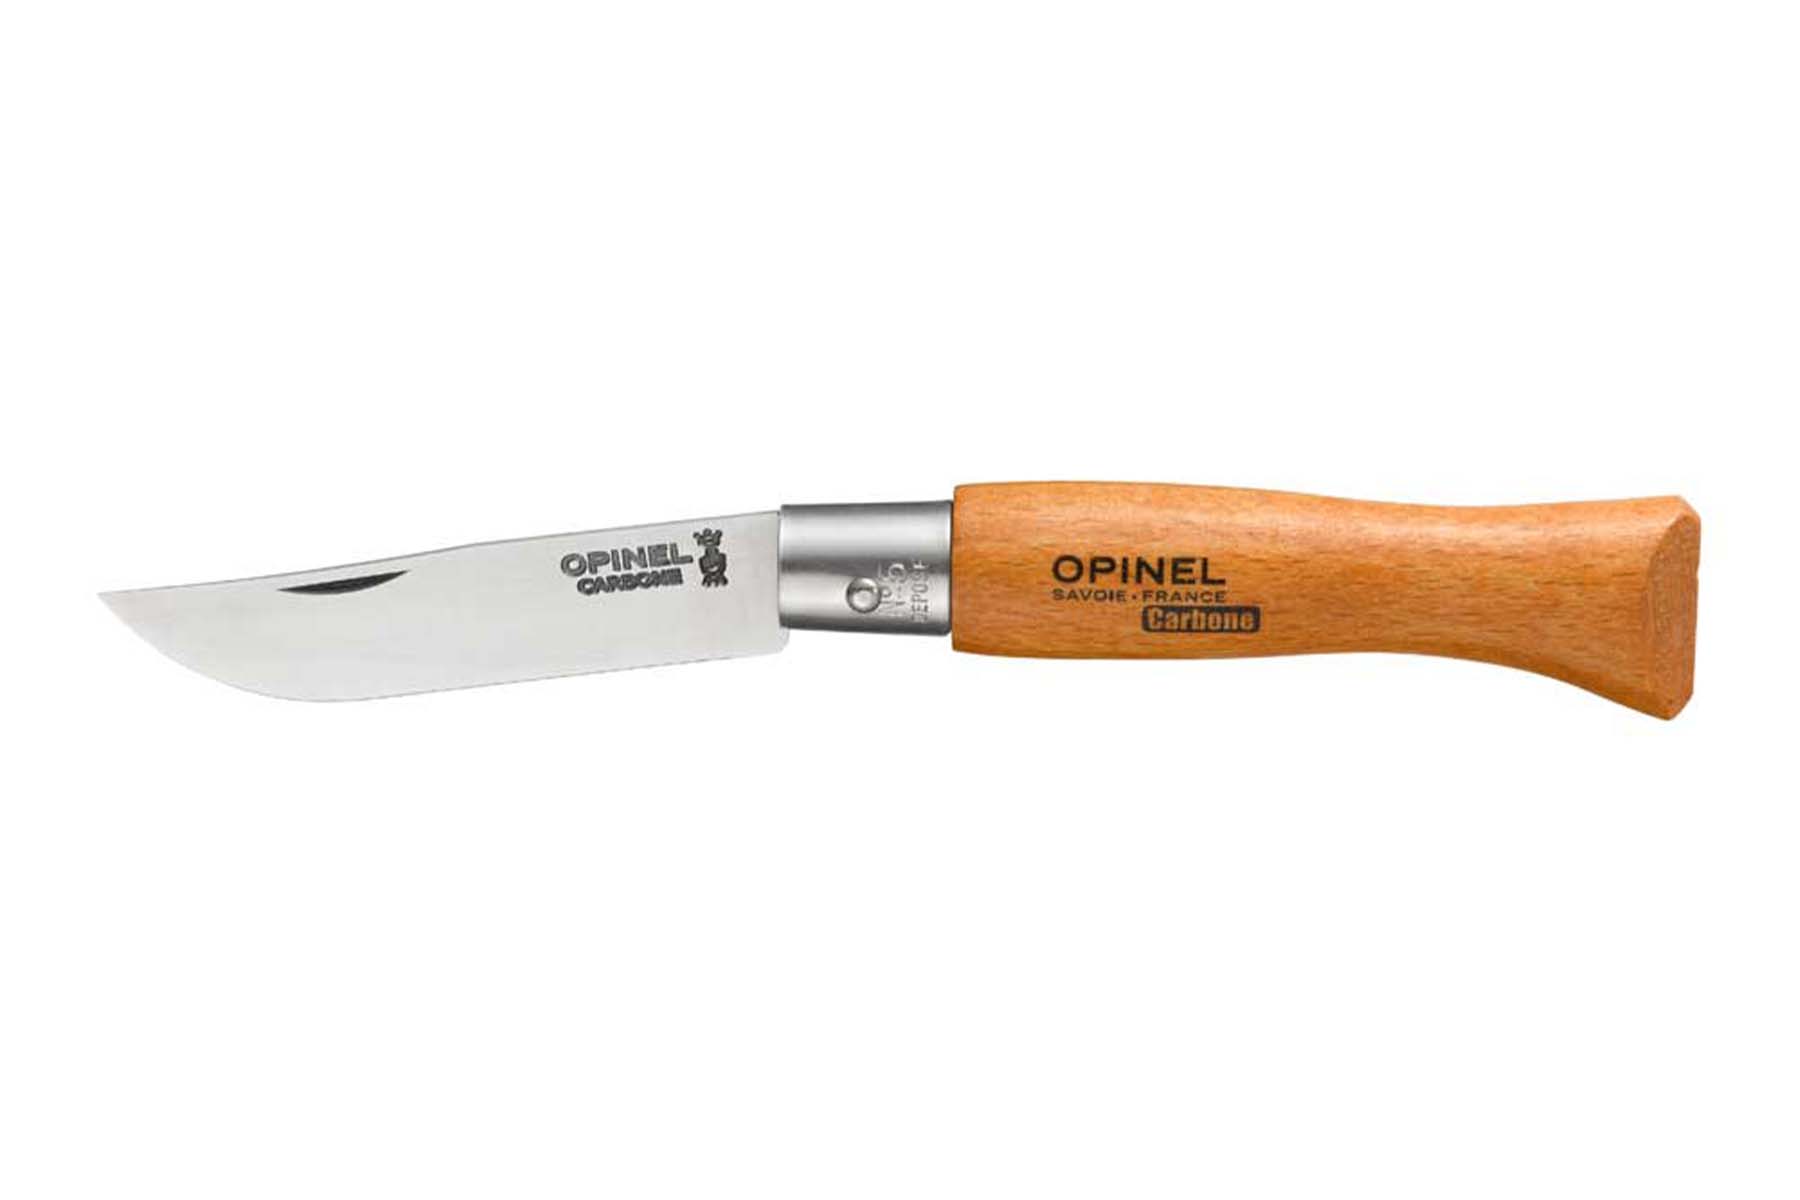 Couteau Opinel n°05 lame carbone